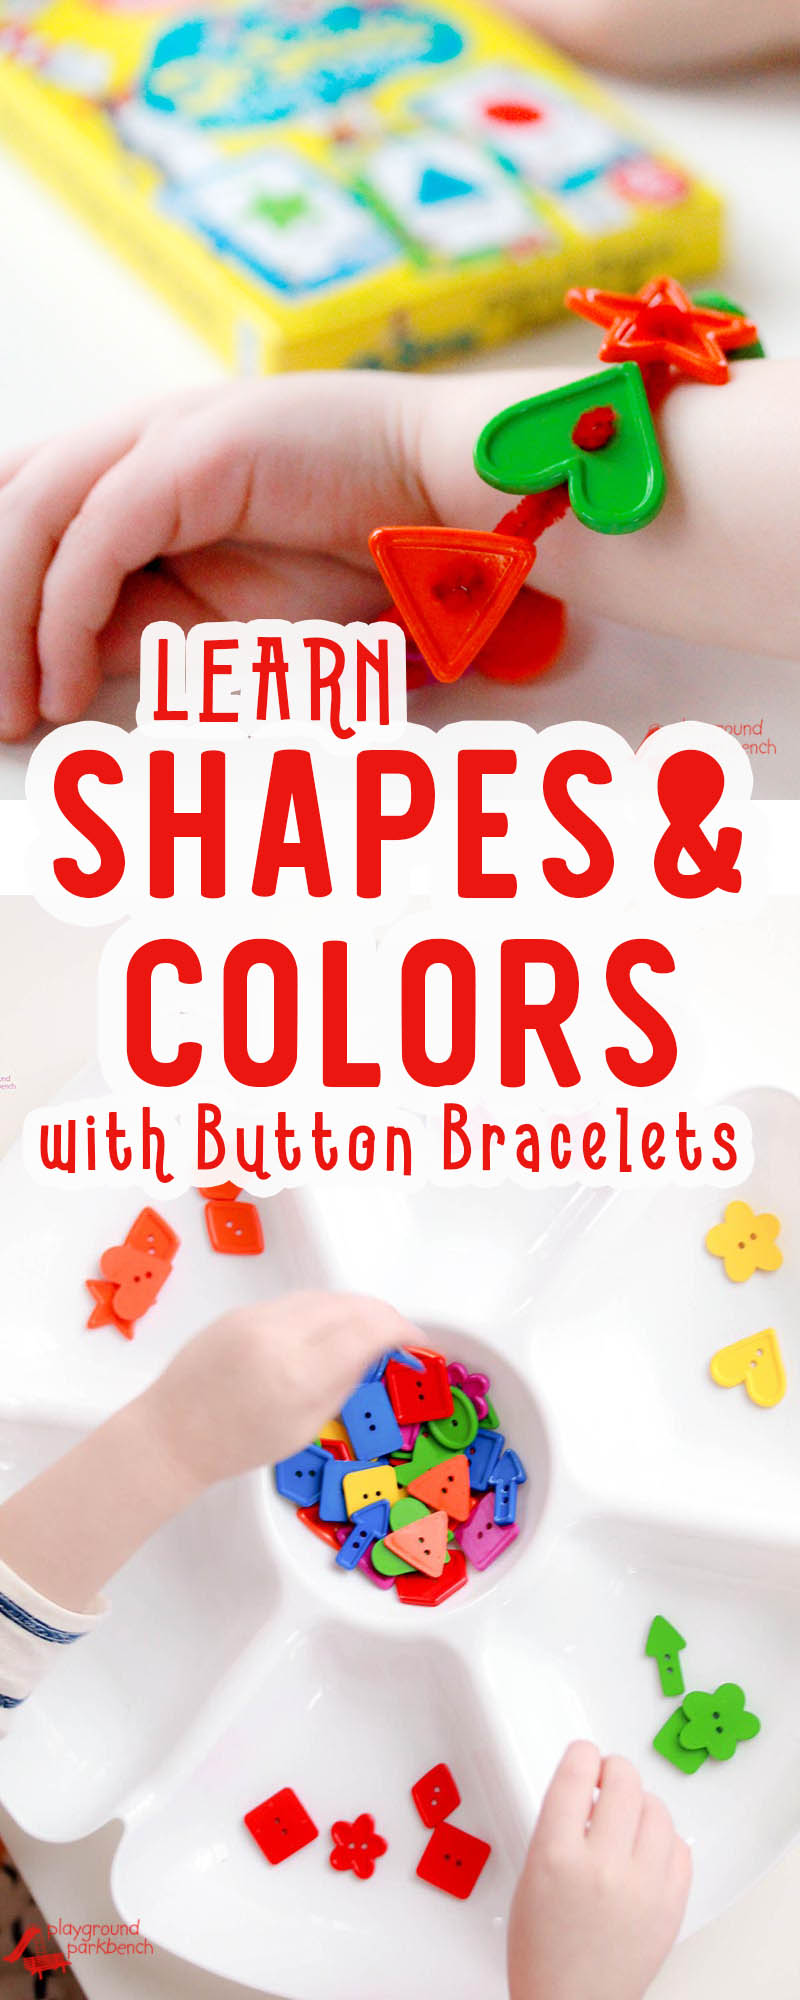 Encourage your preschoolers recognition of shapes and colors through this simple game - and they can build their own button bracelet in the process. | STEM | STEAM Kids | Kids Activities | Crafts for Kids | Shapes | Colors | Preschool | Early Learning | Early Education |